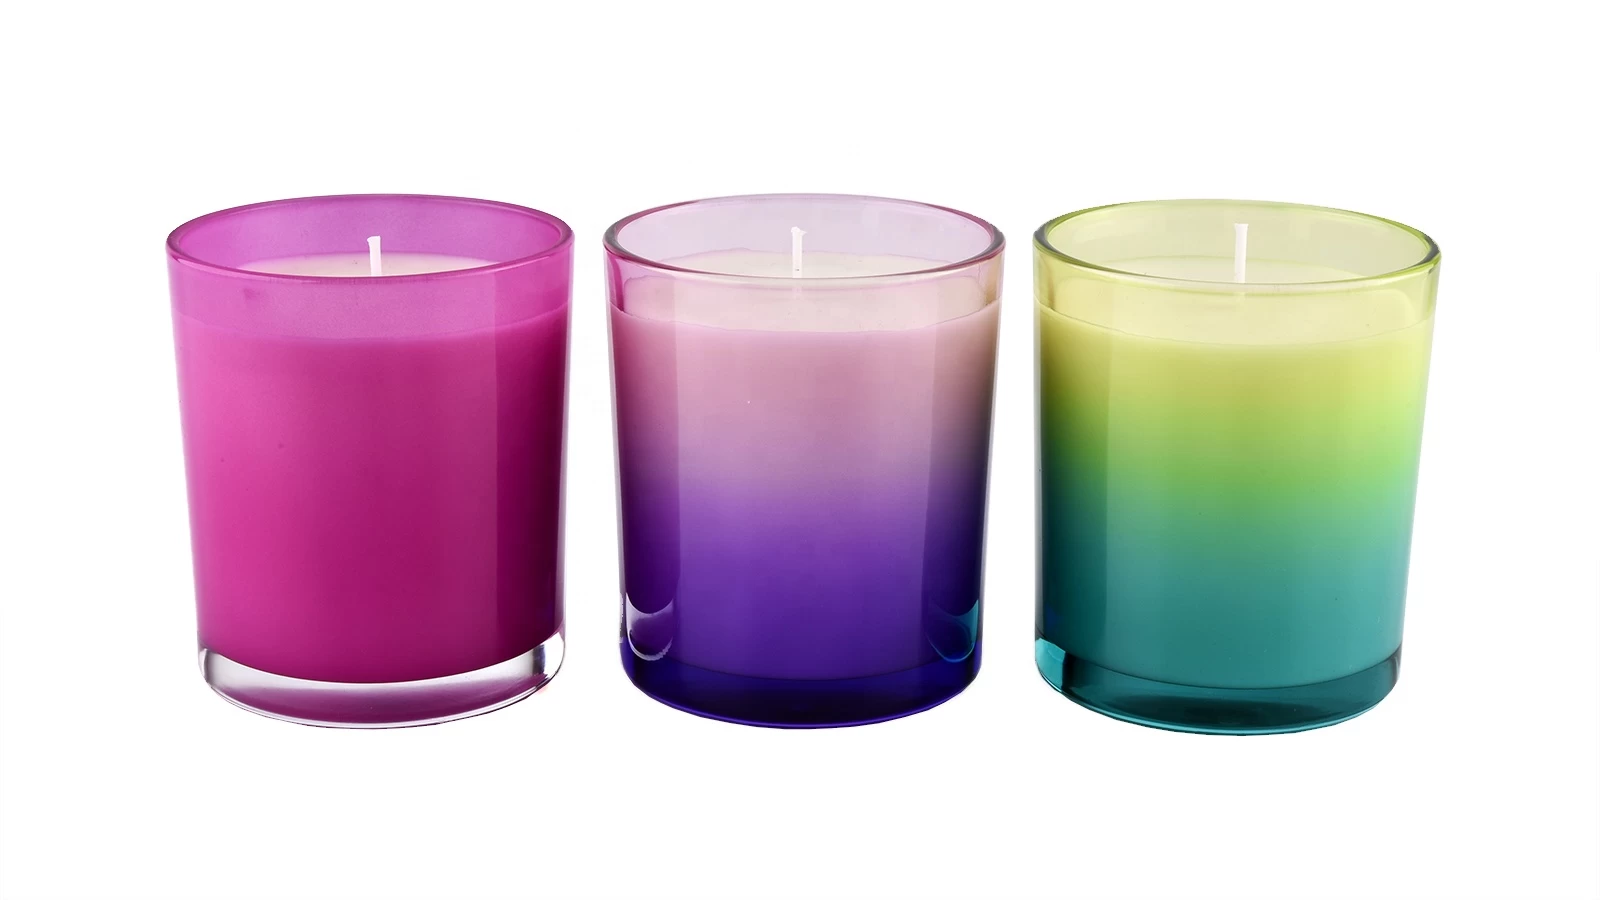 Large iridescent glass candle jars for candle wax